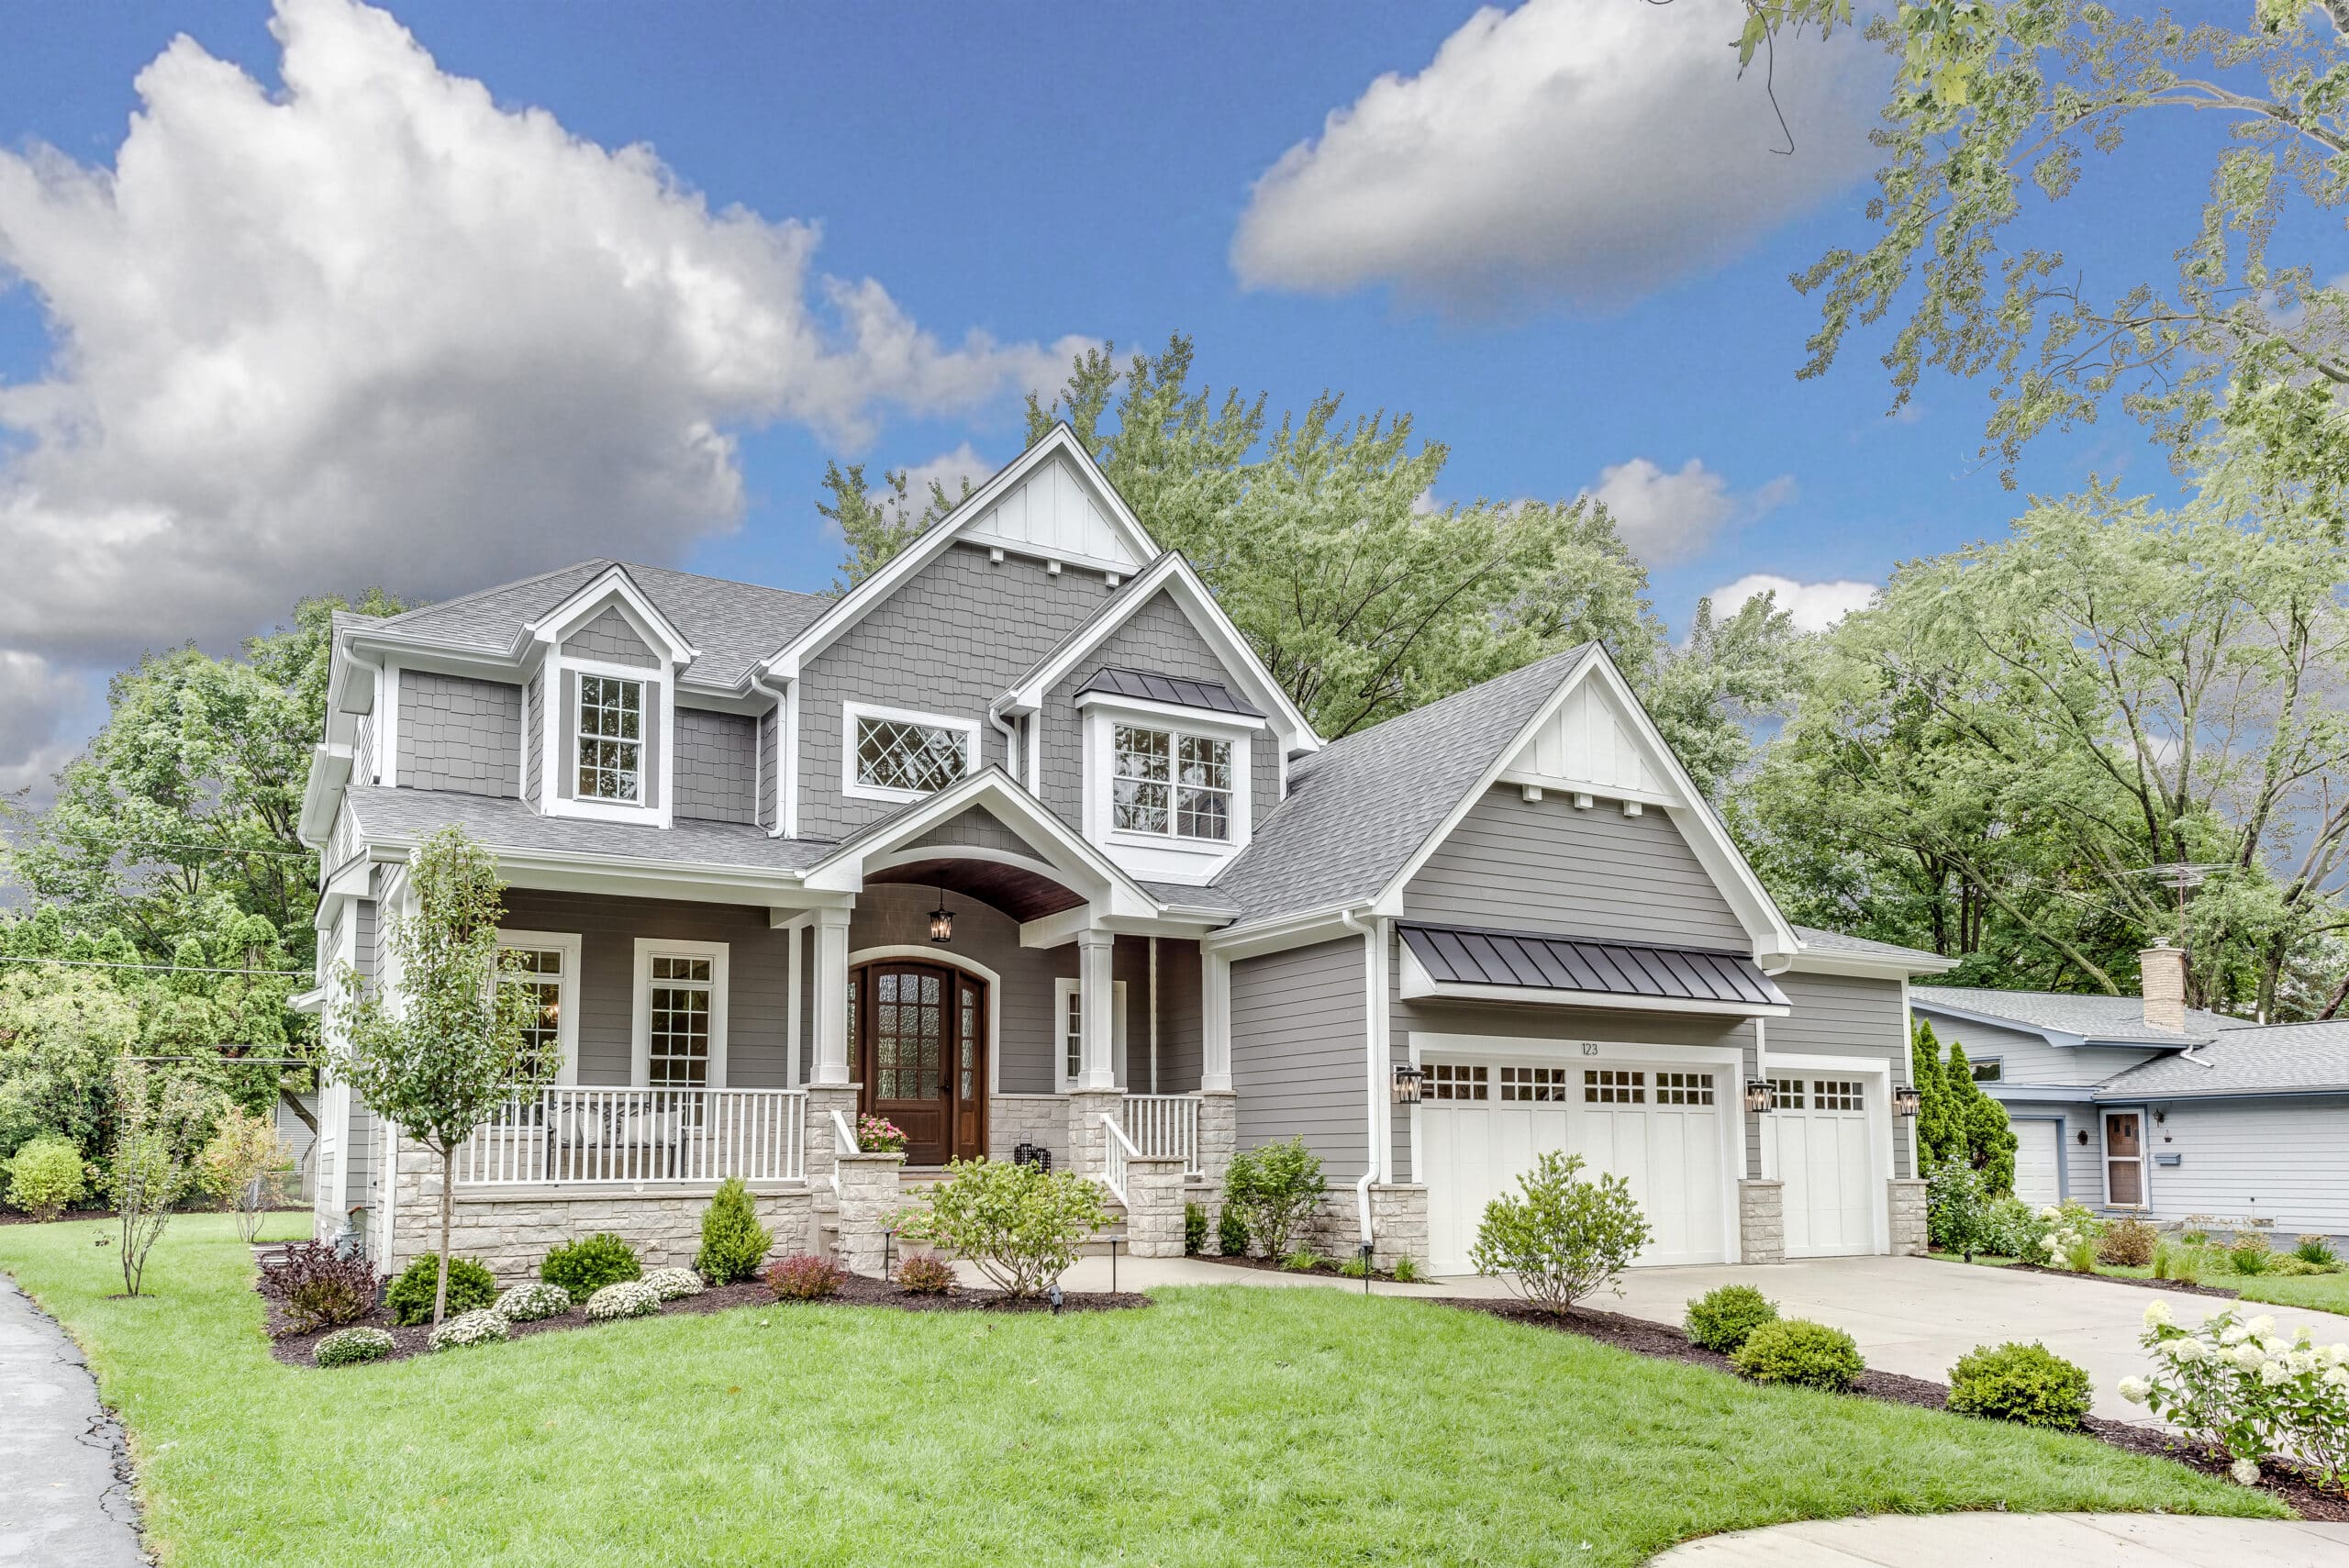 Craftsman style home